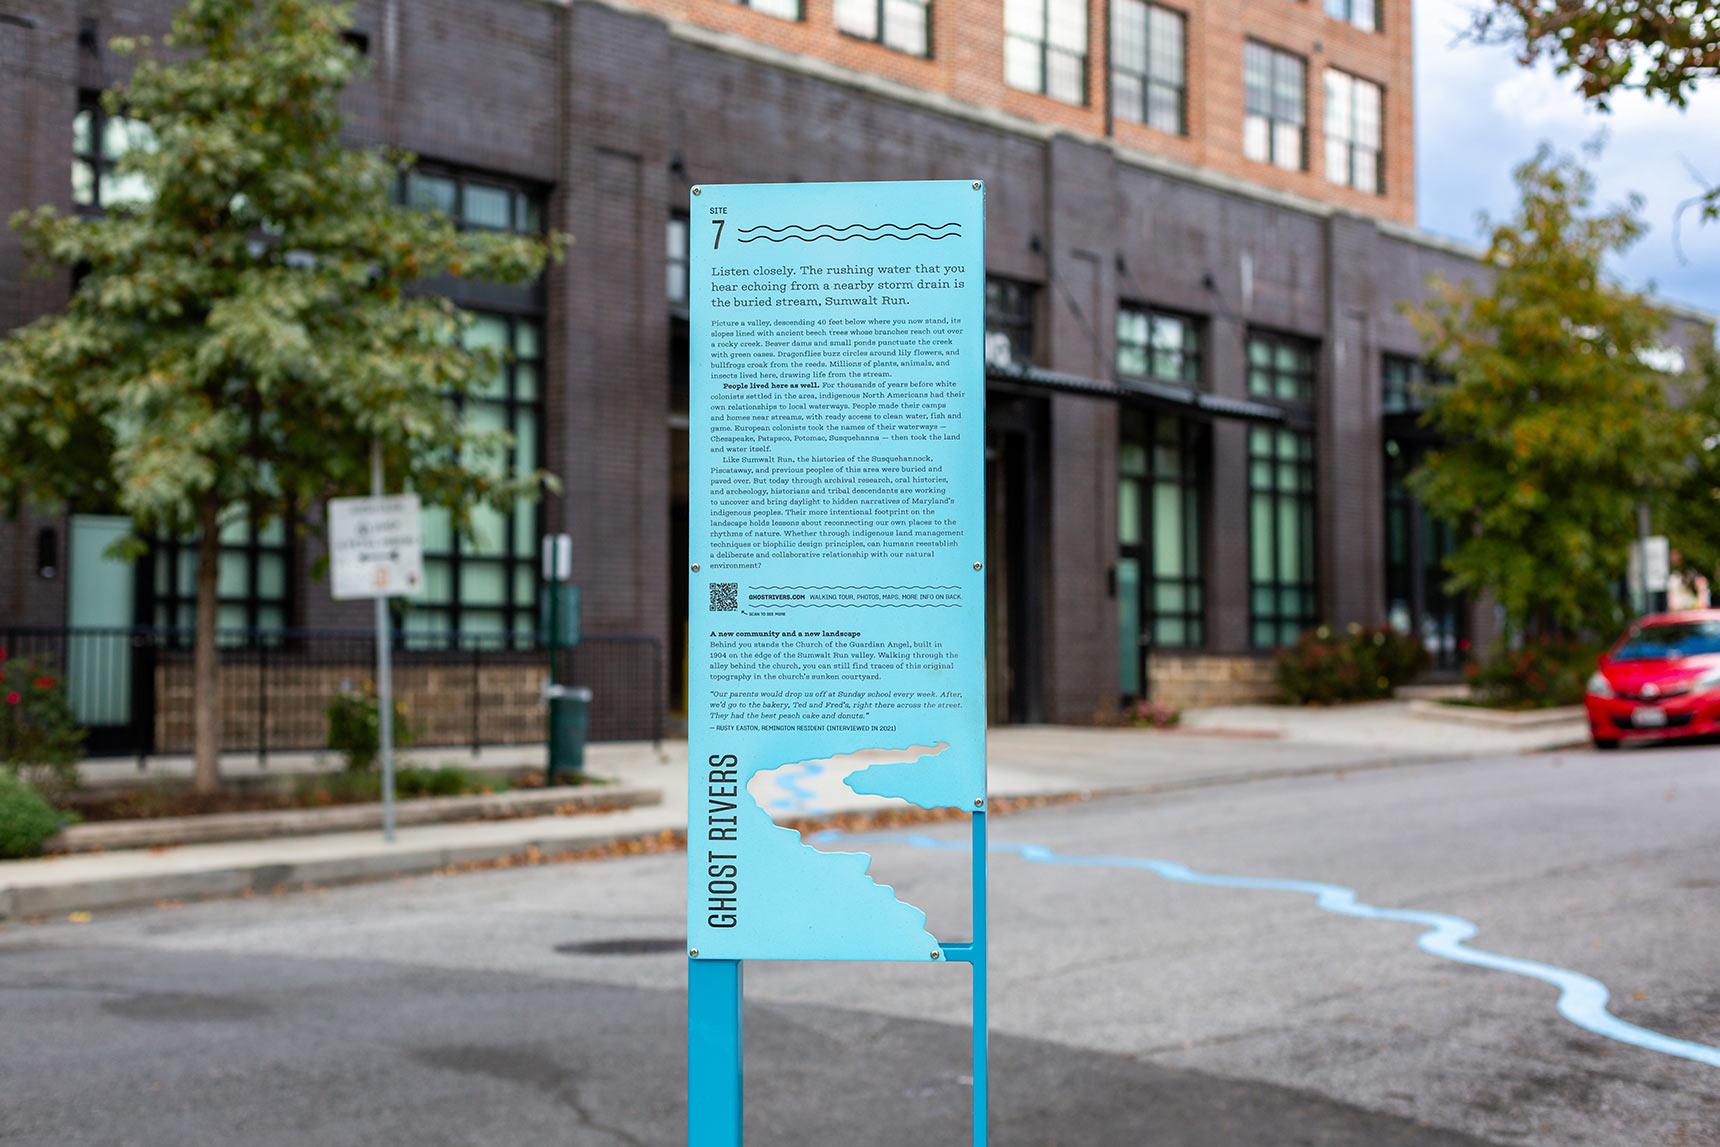 A photo of a tall blue interpretive sign, with the form of a river cut out from the bottom of the sign panel. Through the gap in the sign, a bright blue wavy line snakes across the street, with an apartment building in the background.